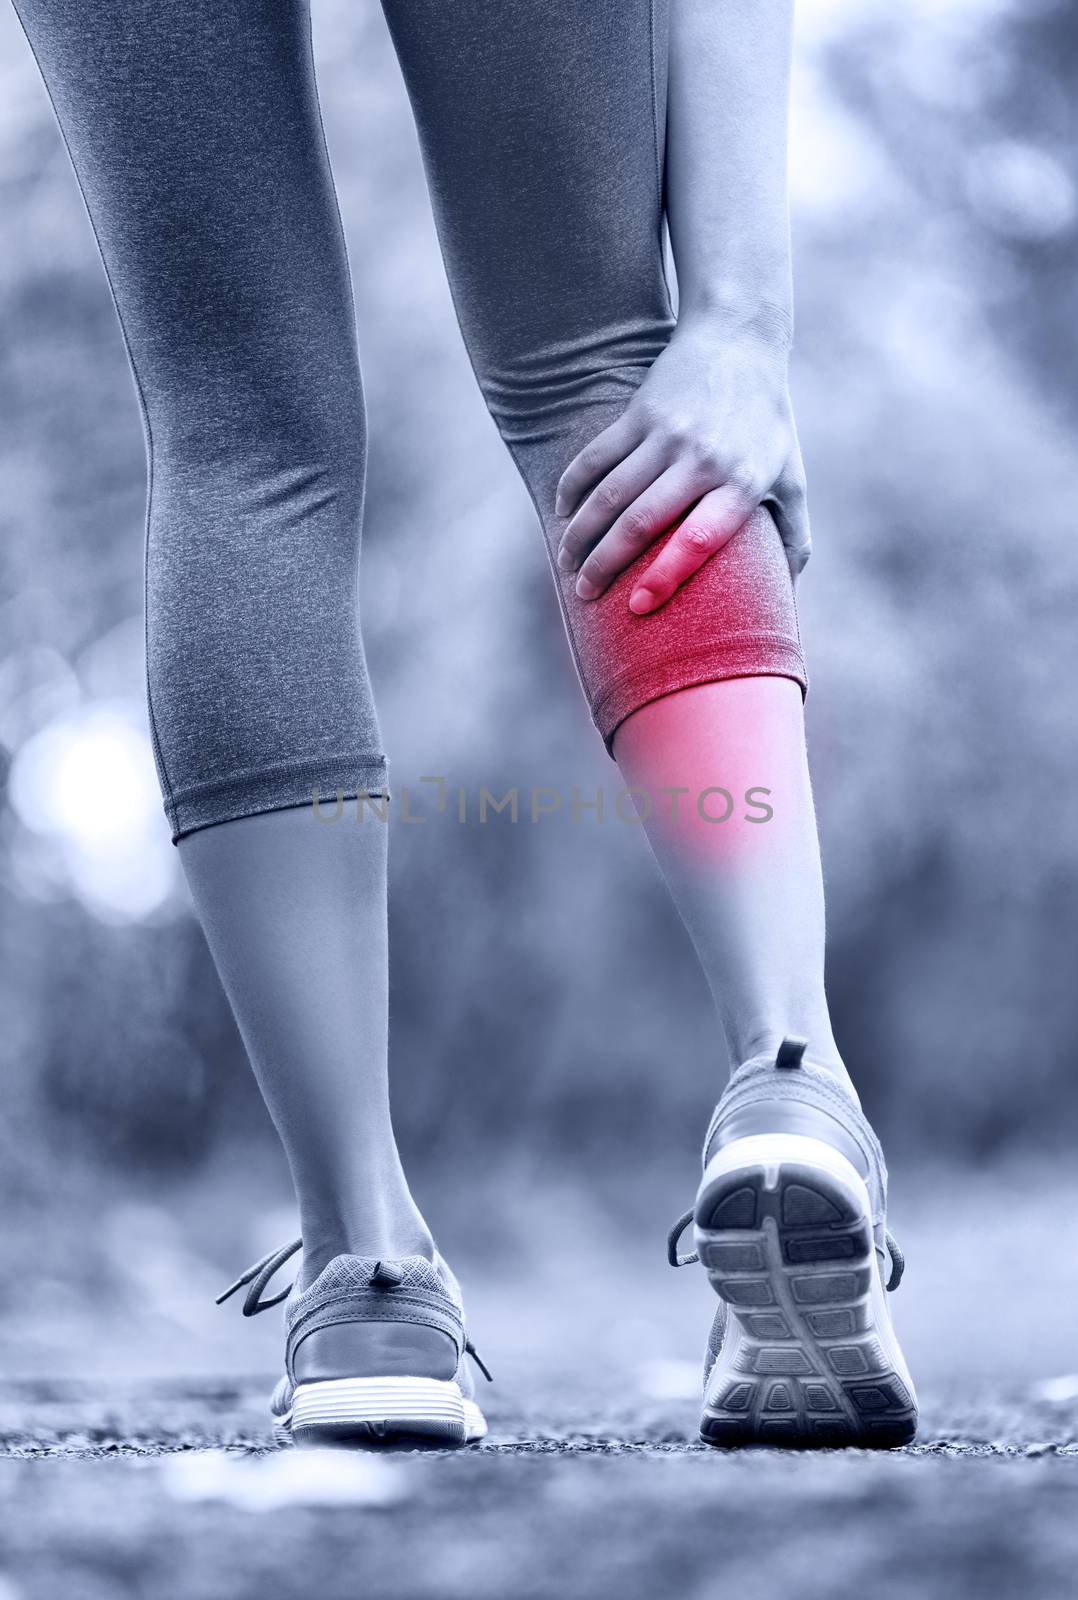 Muscle injury - woman running clutching calf muscle after spraining it while out jogging on the beach. Female athlete sport injury.